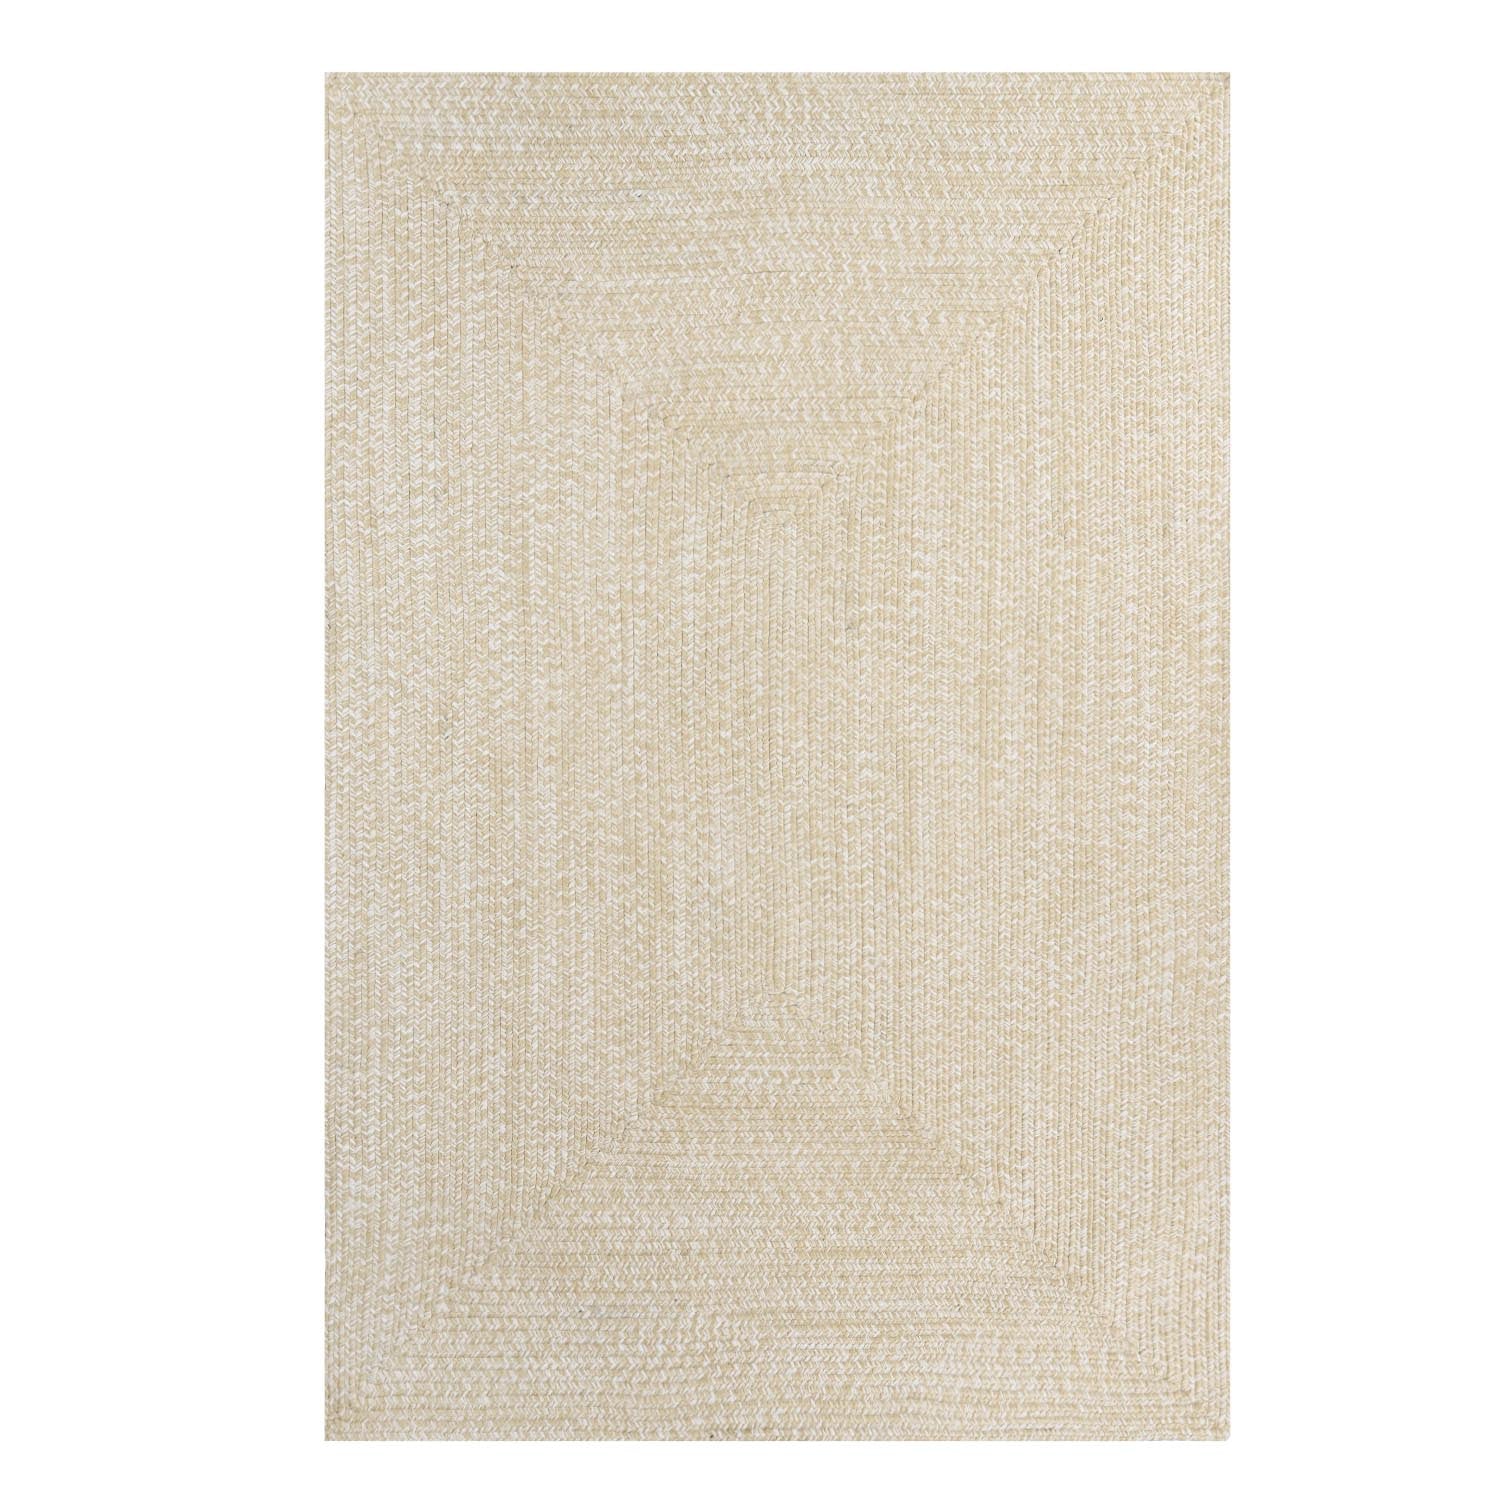 Superior Bohemian Multi-Toned Braided Patterned Indoor Outdoor Area Rug - Cream-White